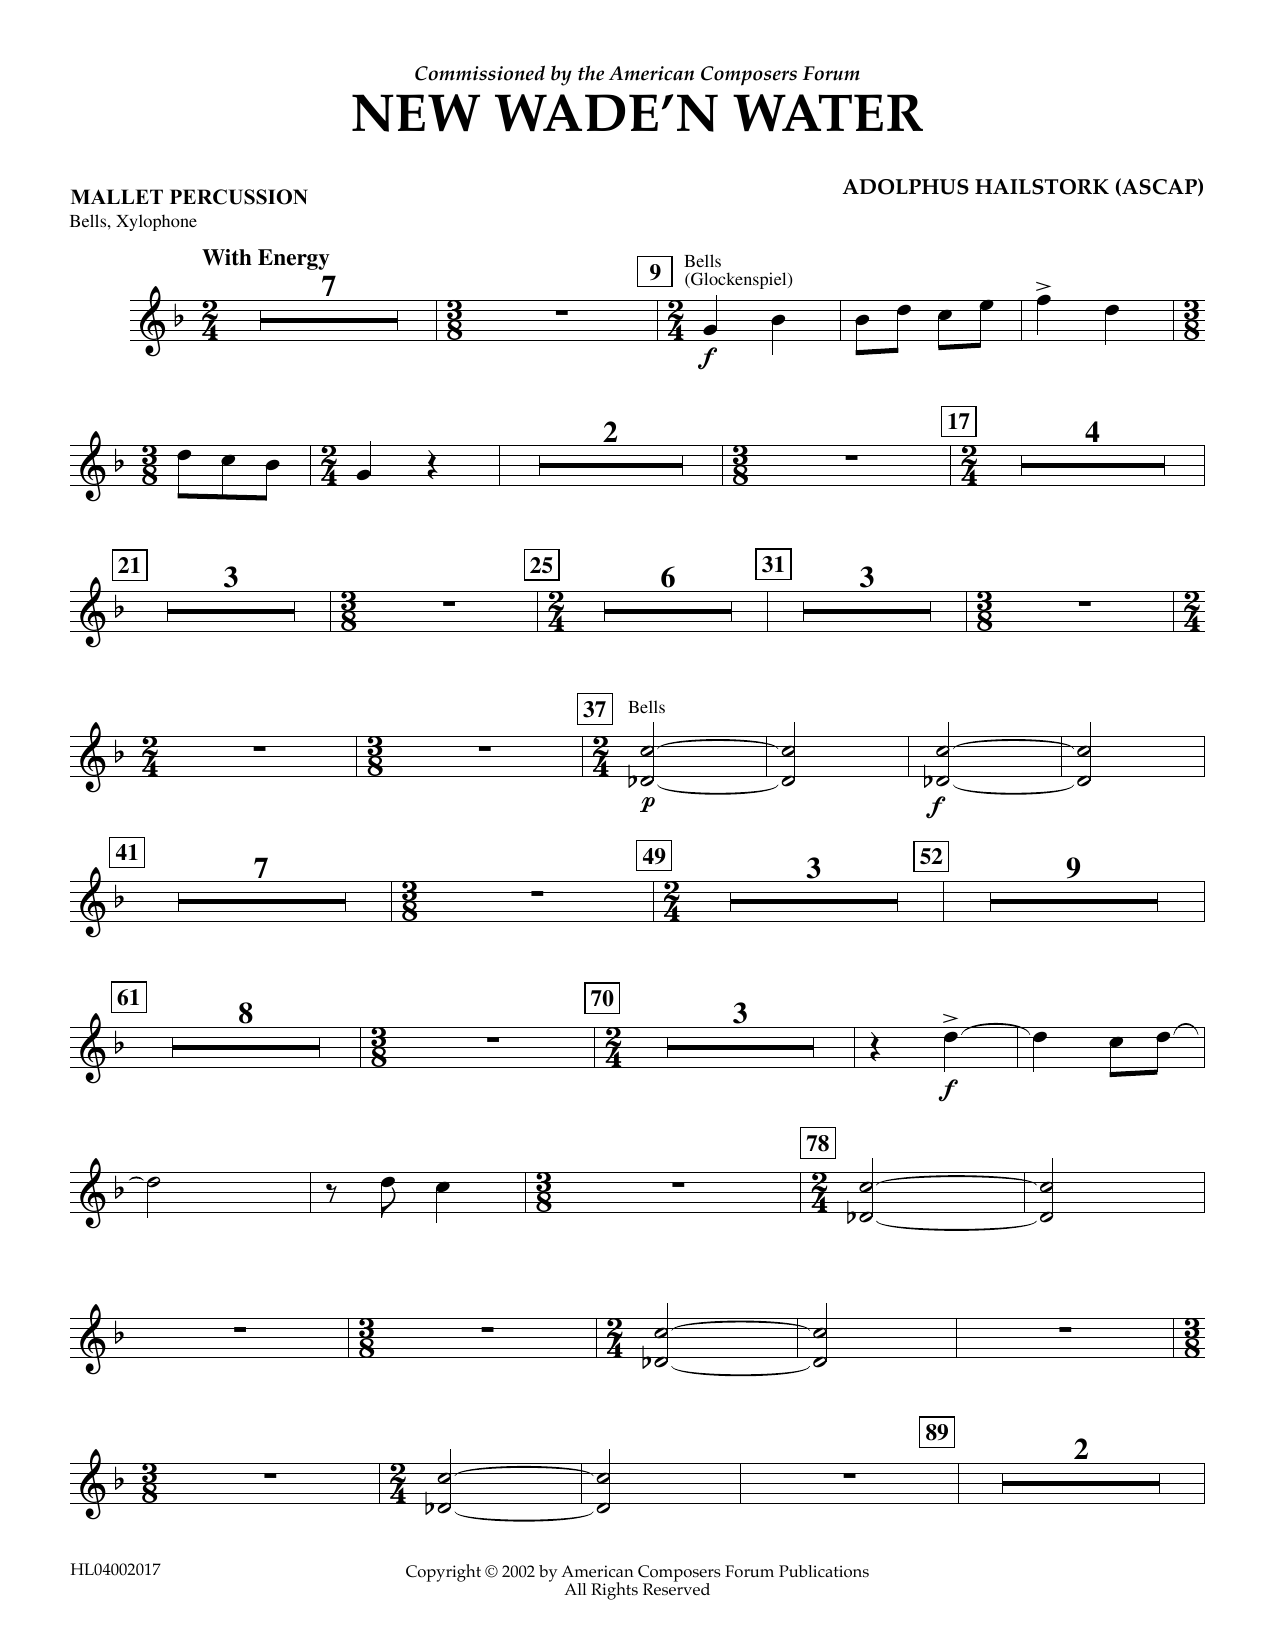 Download Adolphus Hailstork New Wade 'n Water - Mallet Percussion Sheet Music